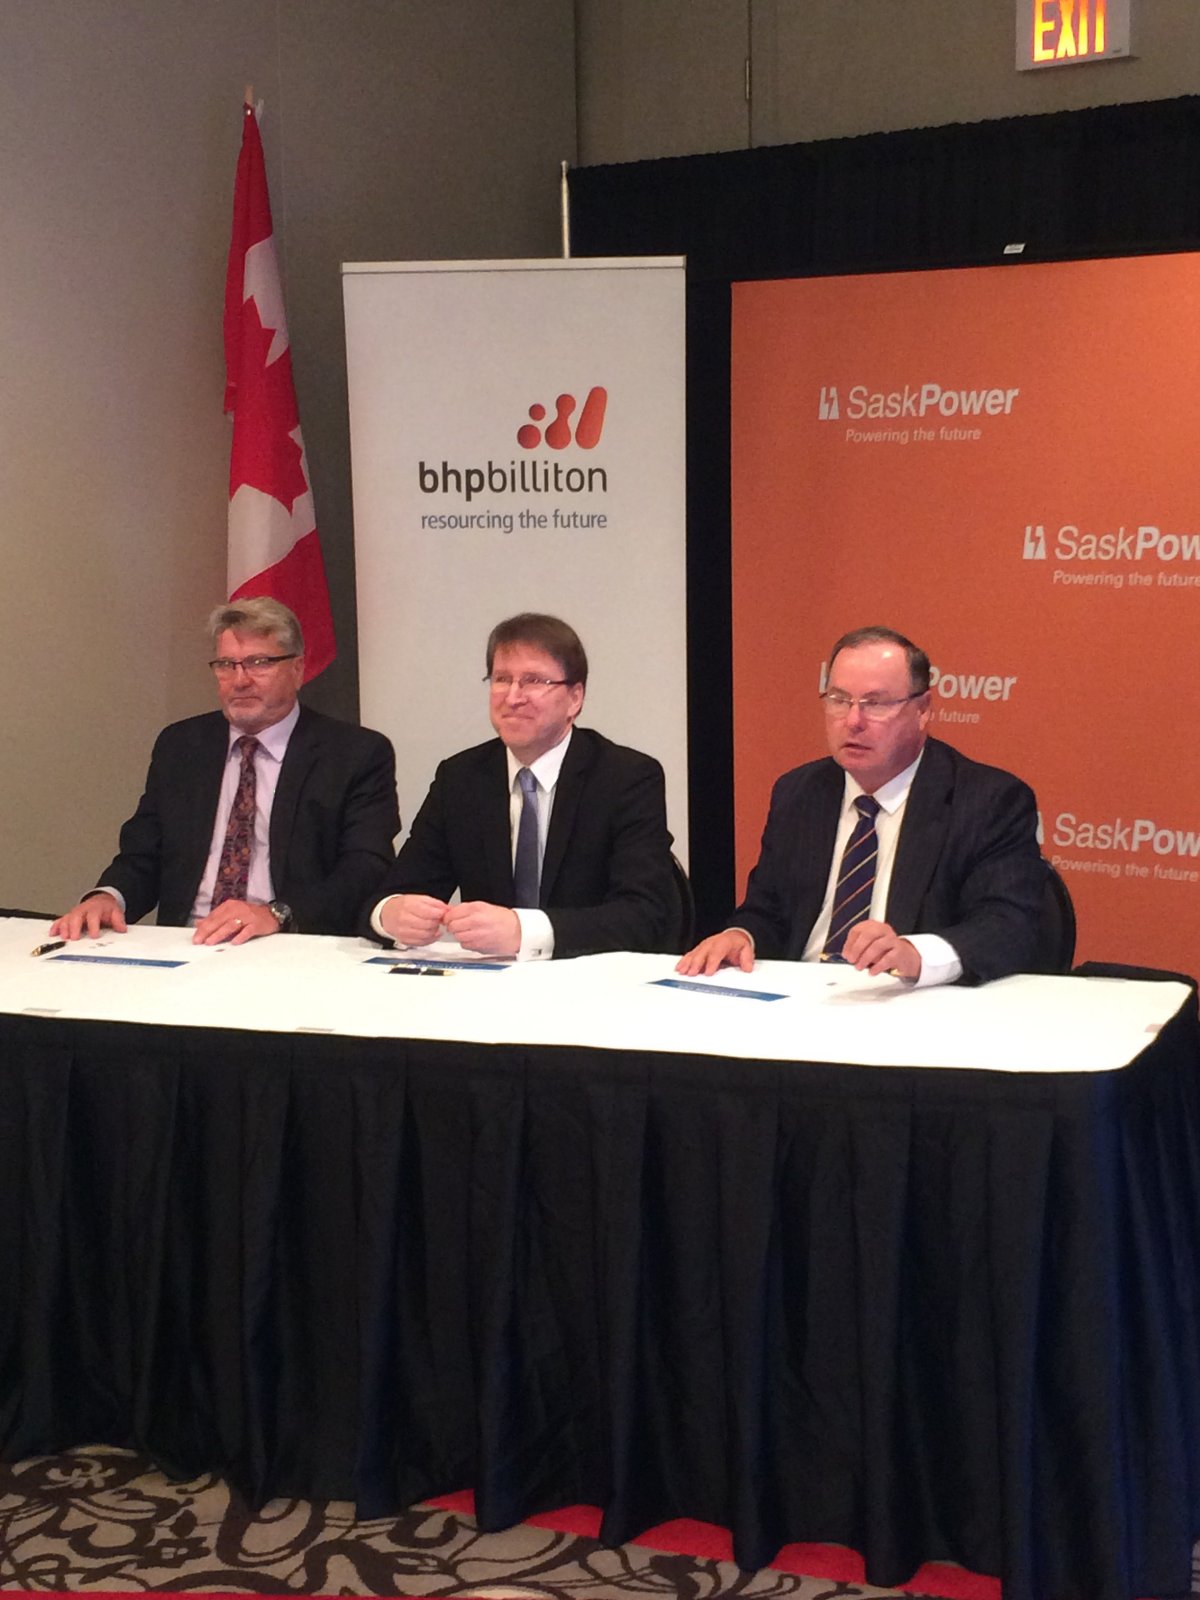 The announcement was made in front of dozens of delegates from over 100 countries attending the SaskPower symposium. 